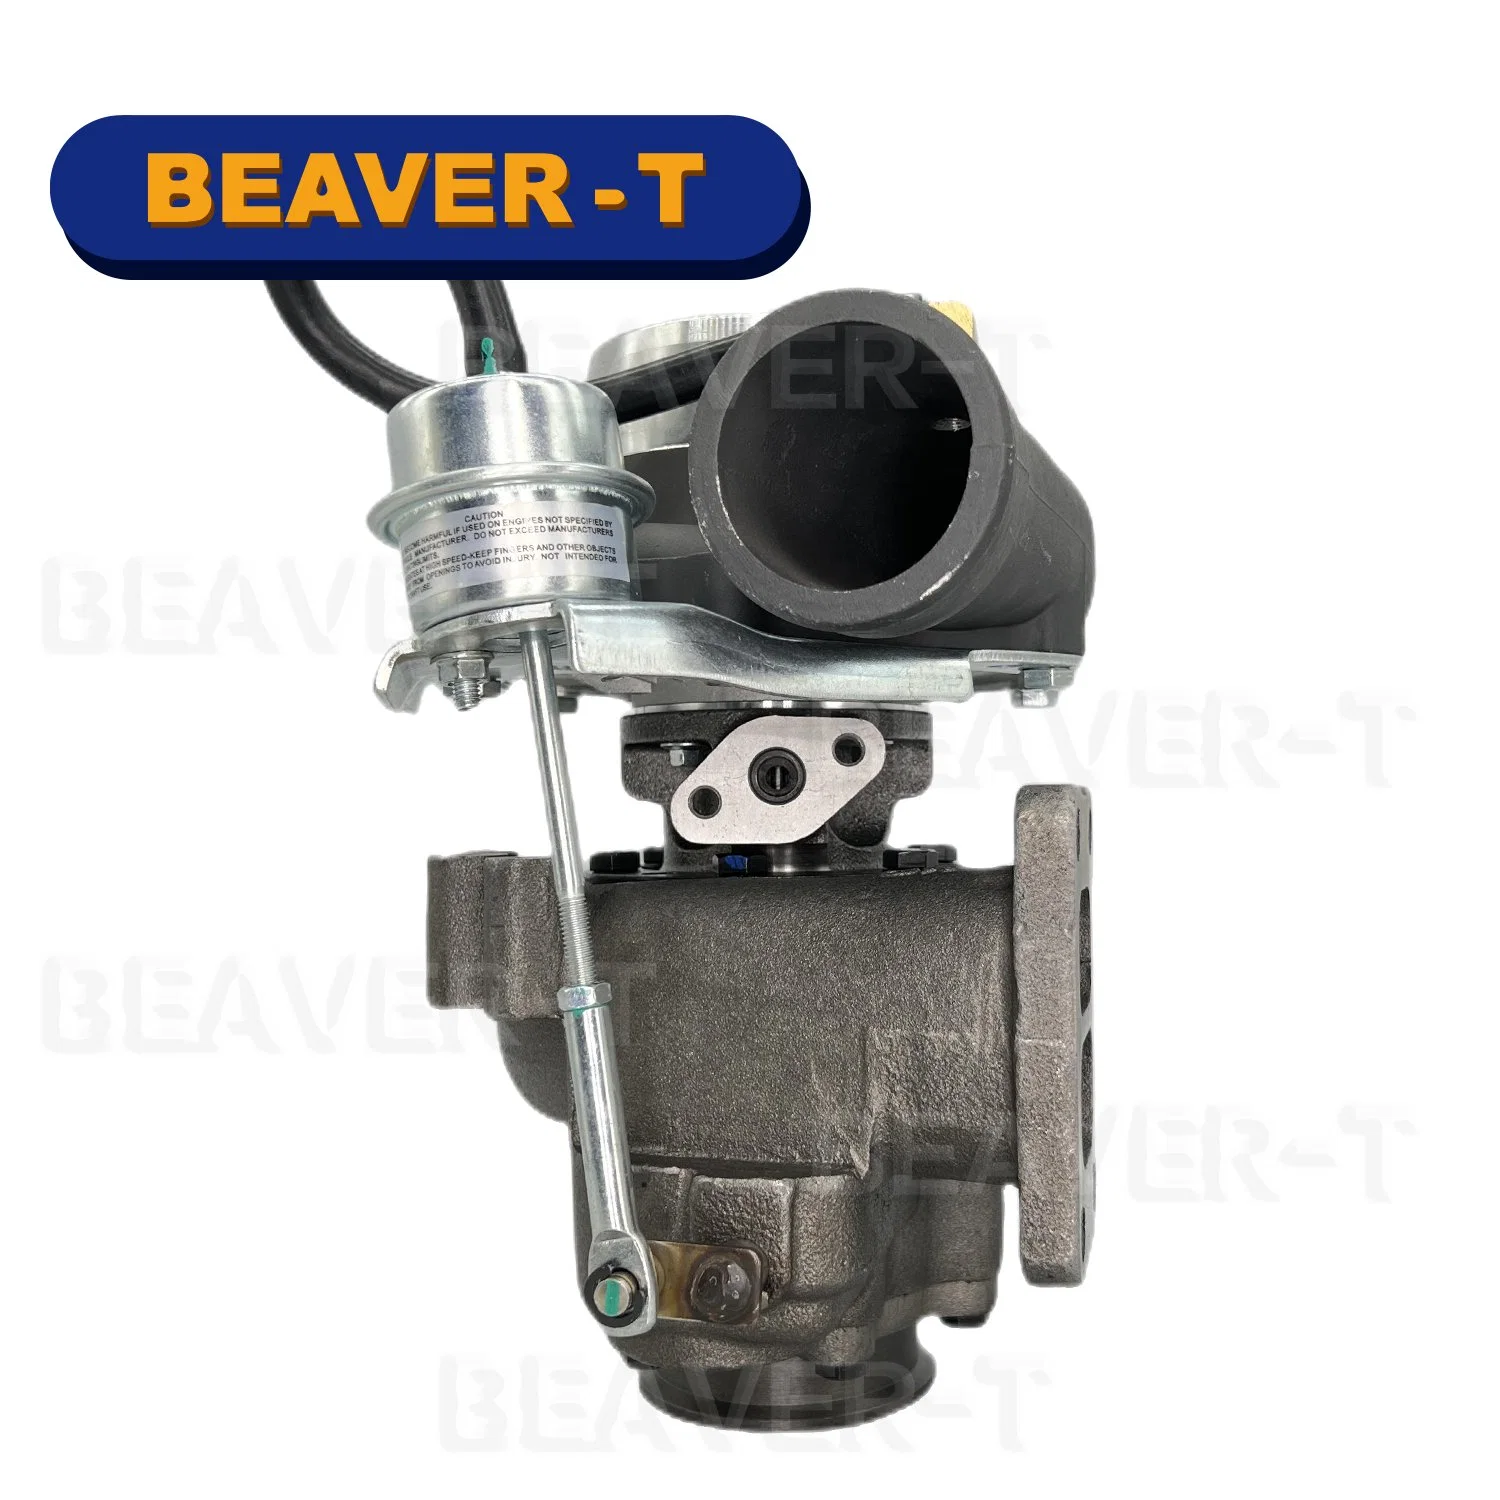 Gt35 755057-5002s T64801011 Turbocharger for 6100